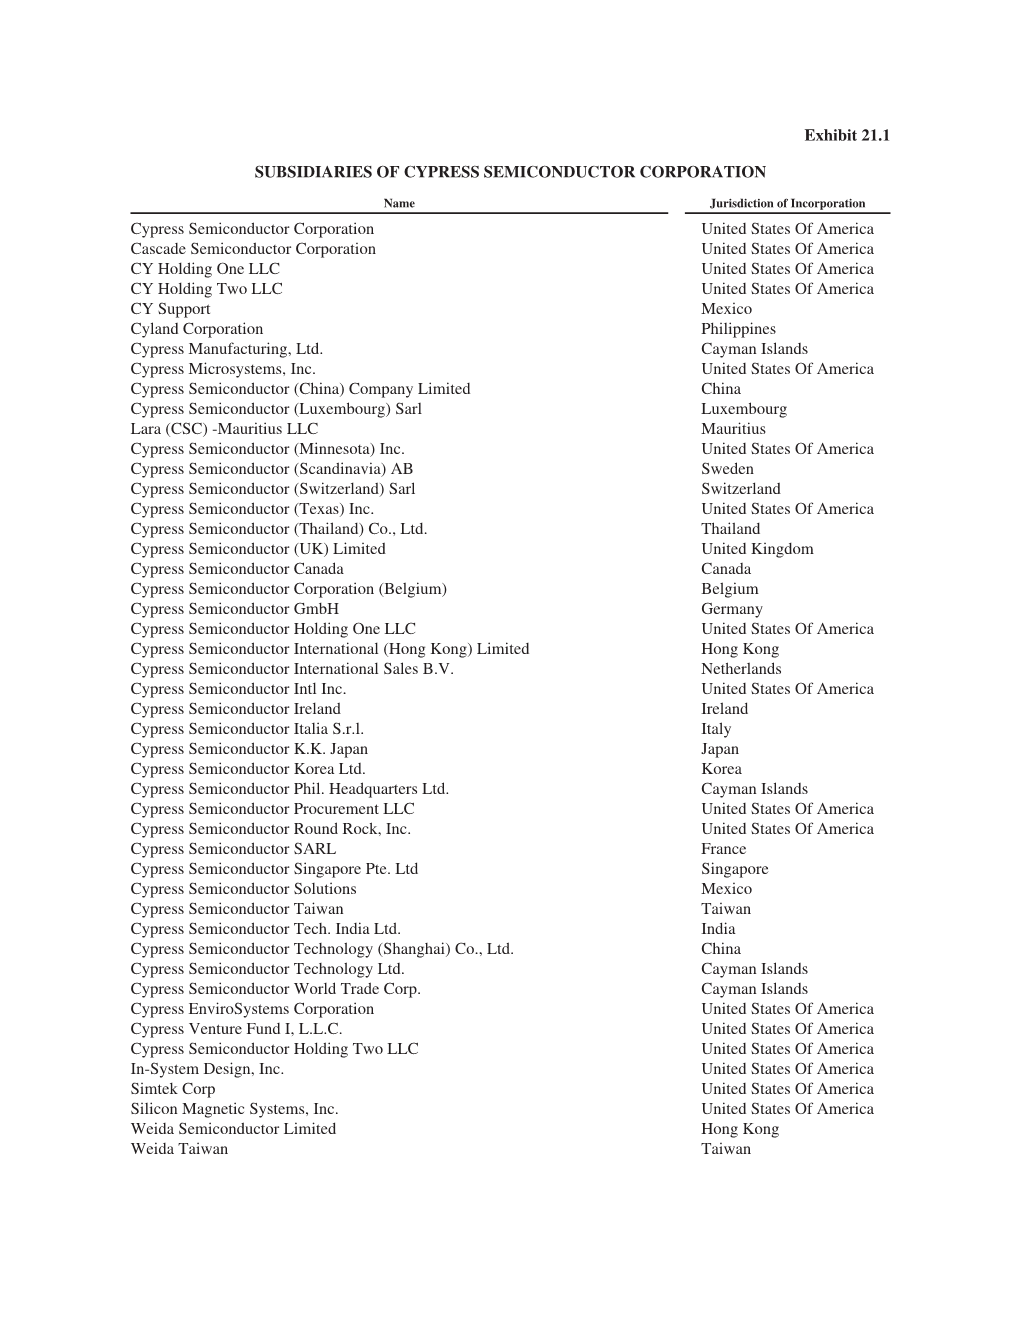 Exhibit 21.1 SUBSIDIARIES of CYPRESS SEMICONDUCTOR